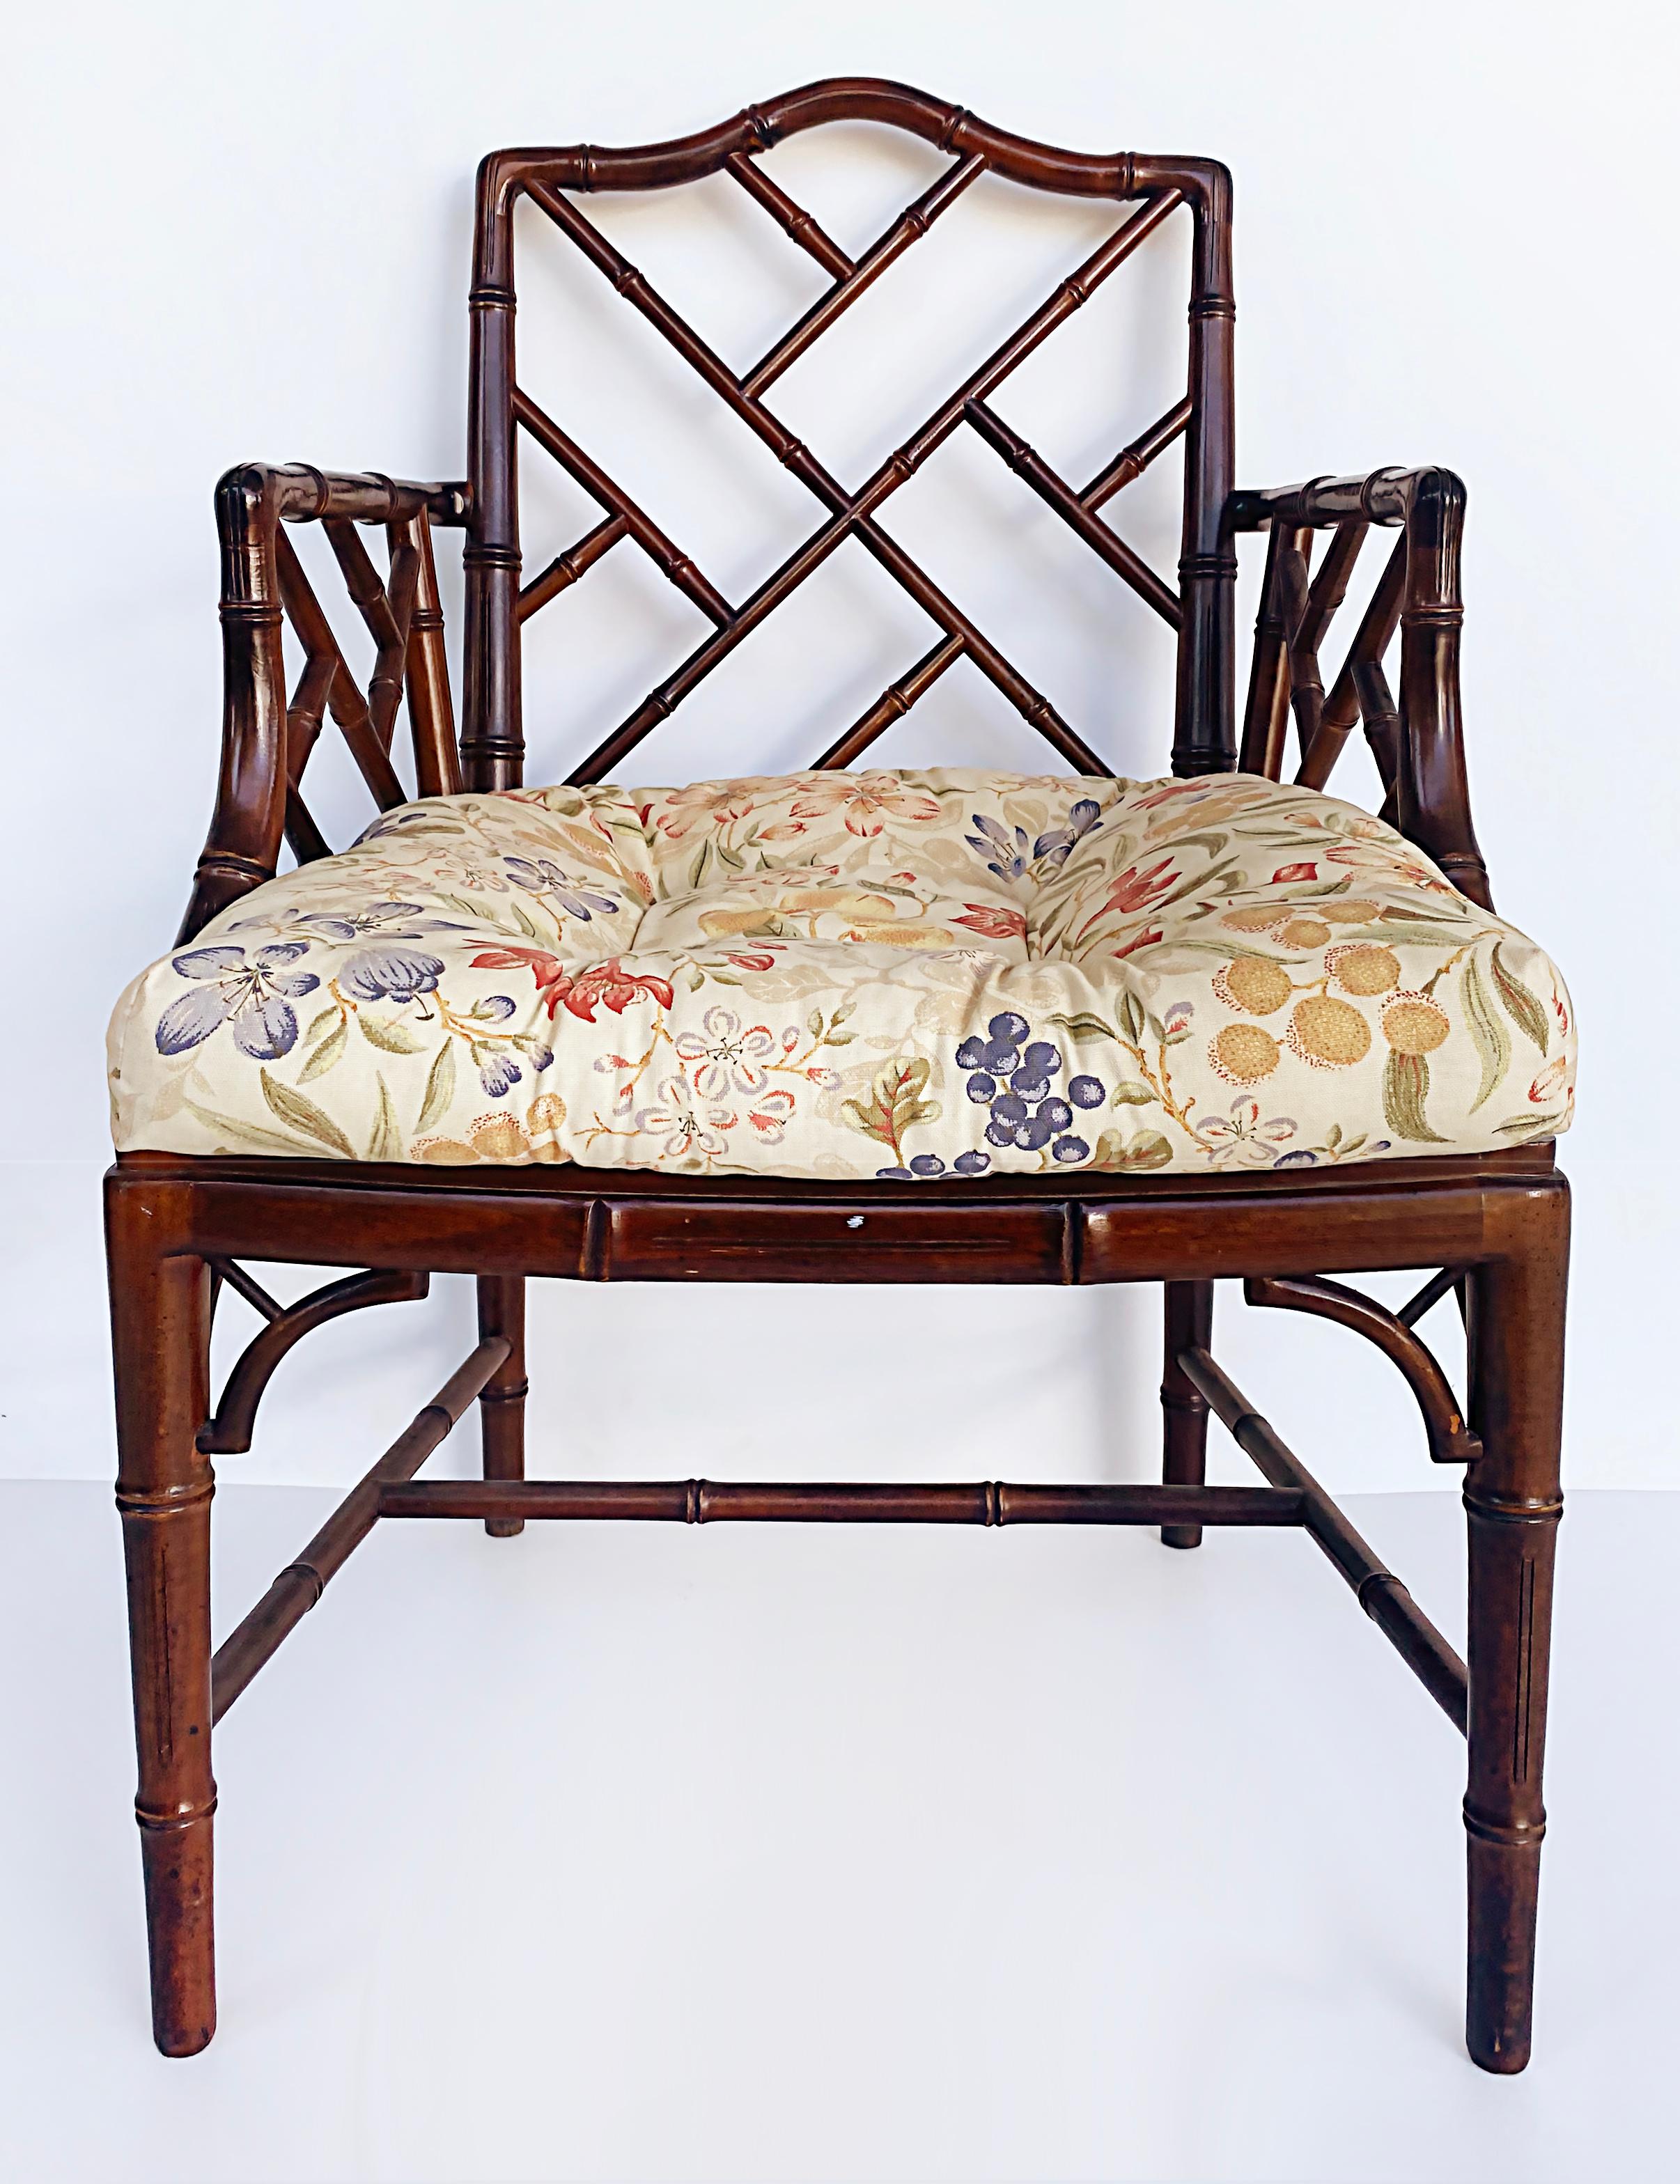 Chinese Chippendale style faux bamboo armchair, caned seat, loose seat cushion

Offered for sale is a Chinese Chippendale style faux bamboo armchair with caned seat and a floral upholstered loose seat cushion. The chair is great as additional